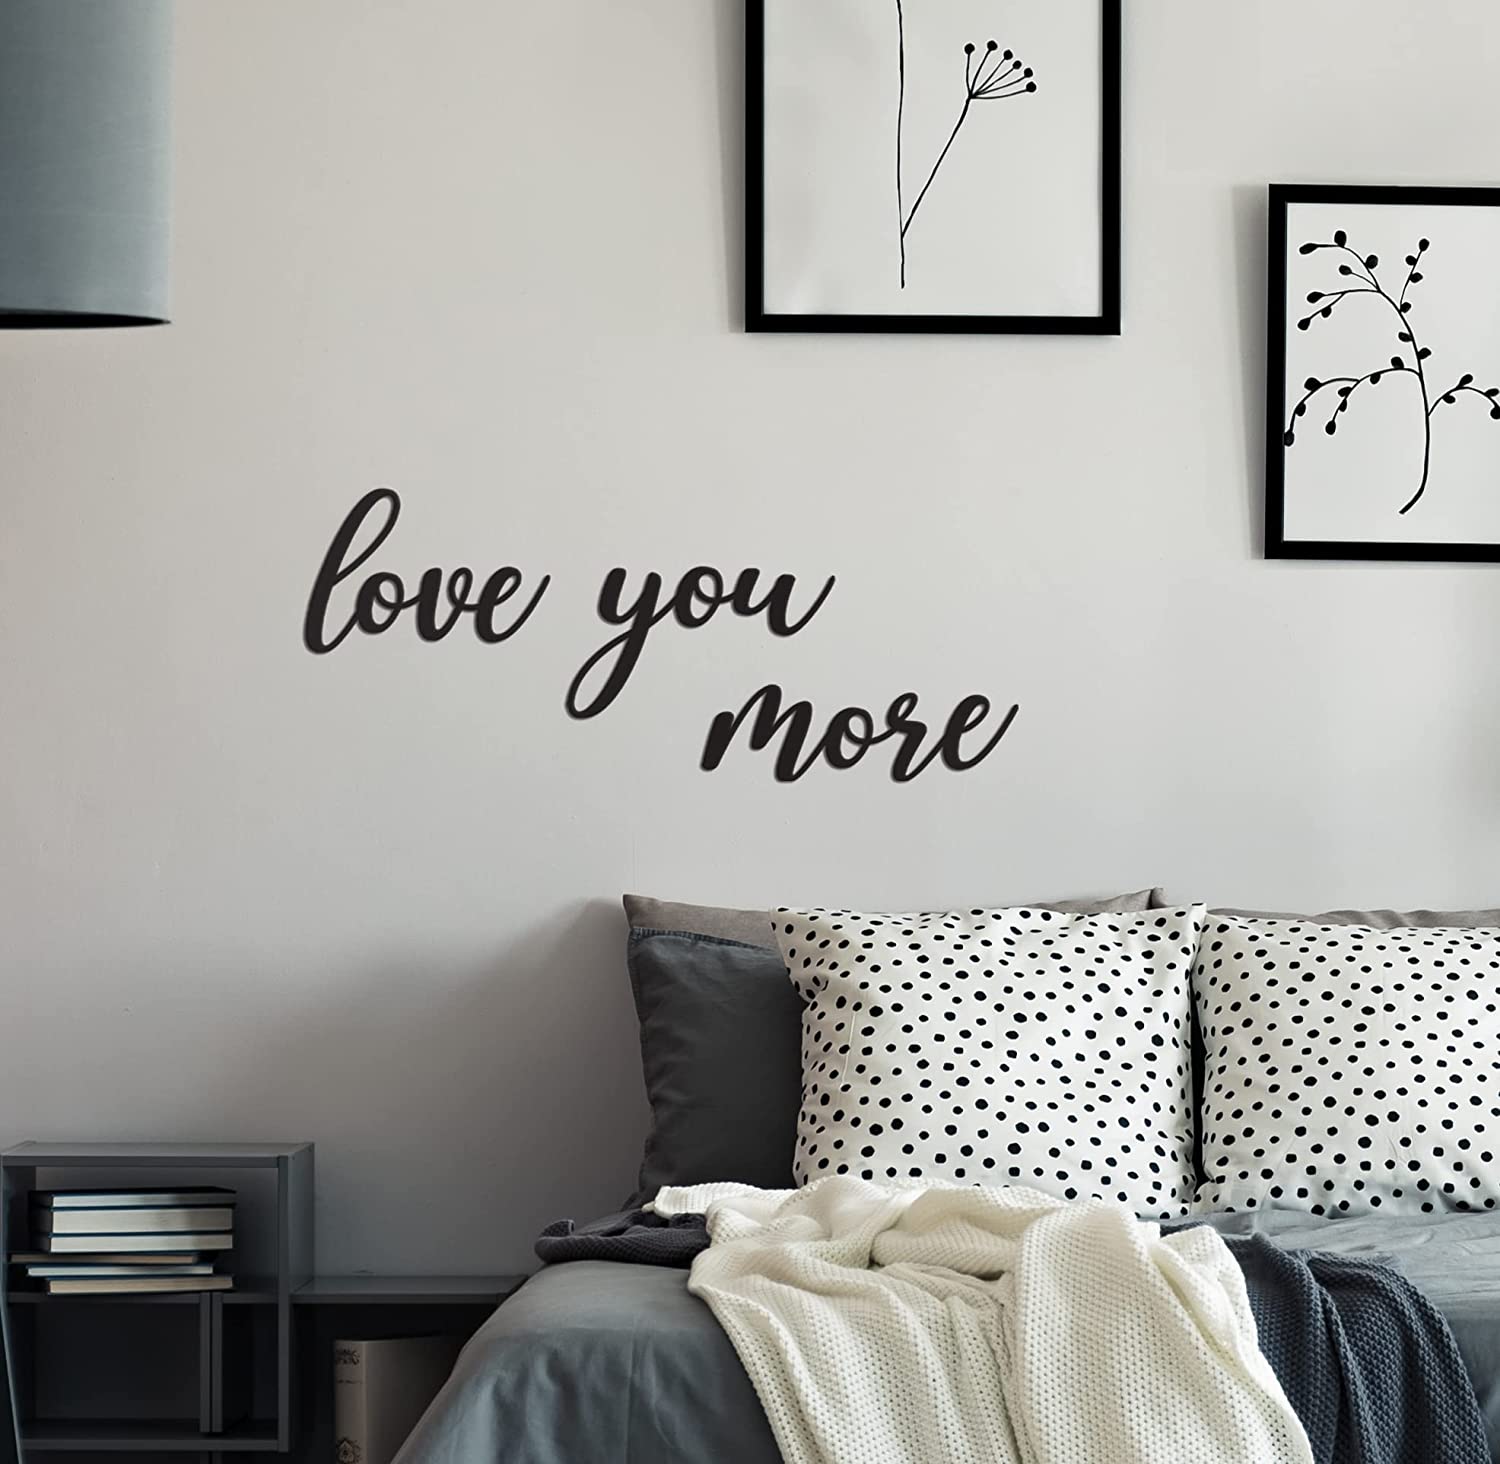 Love You More Sign Metal Wall Decor - 25"X21" Black Modern Beautiful I Love You More Sign for Hanging Any Room Love You More Love You Most Wall Art Love You More Decorations